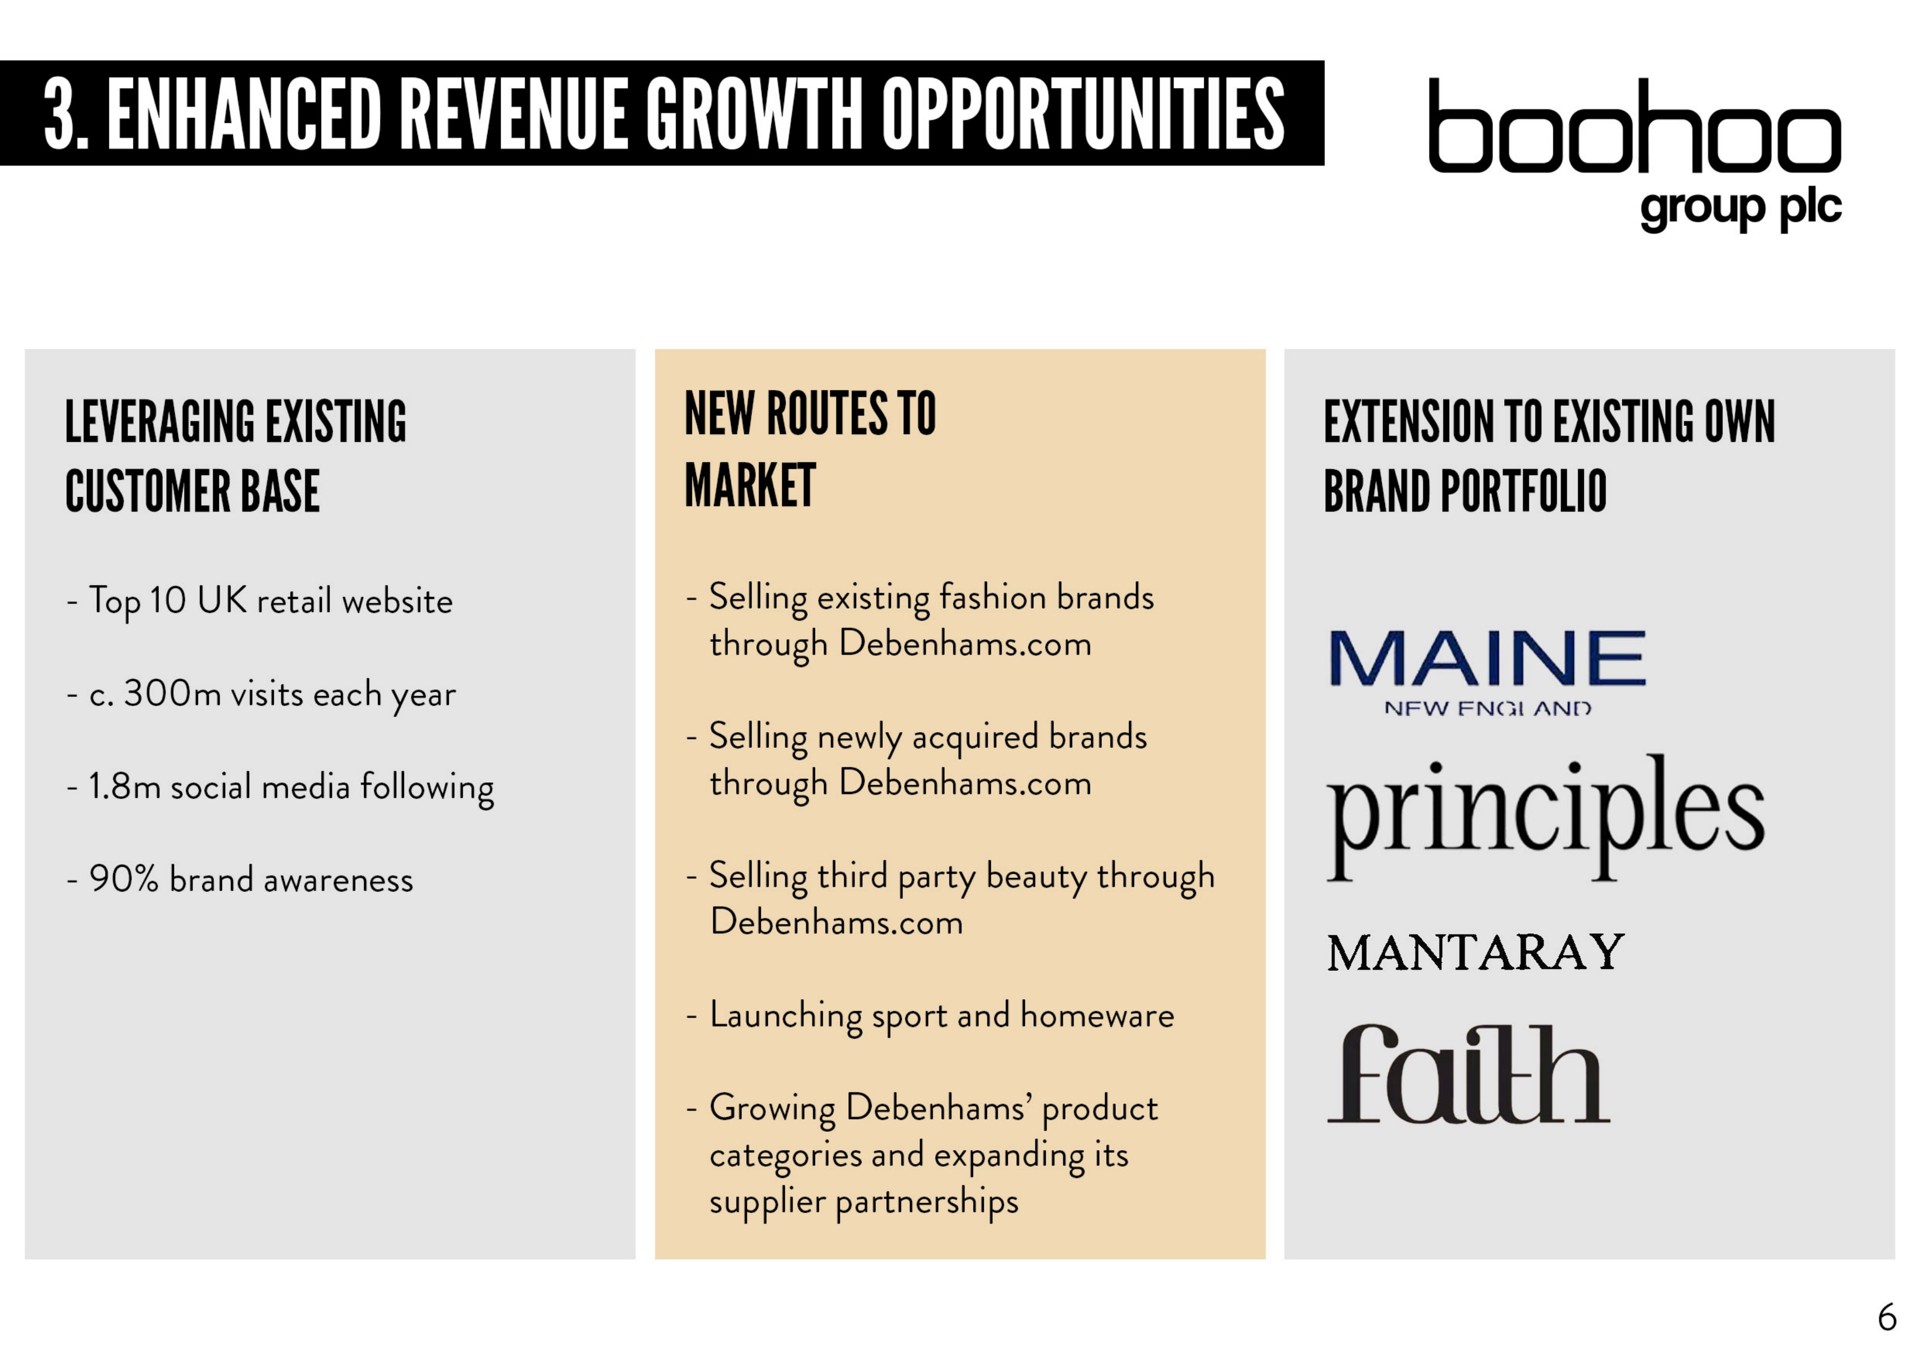 be a boohoo group leveraging existing customer base new routes market extension existing own brand portfolio principles faith | Boohoo Group